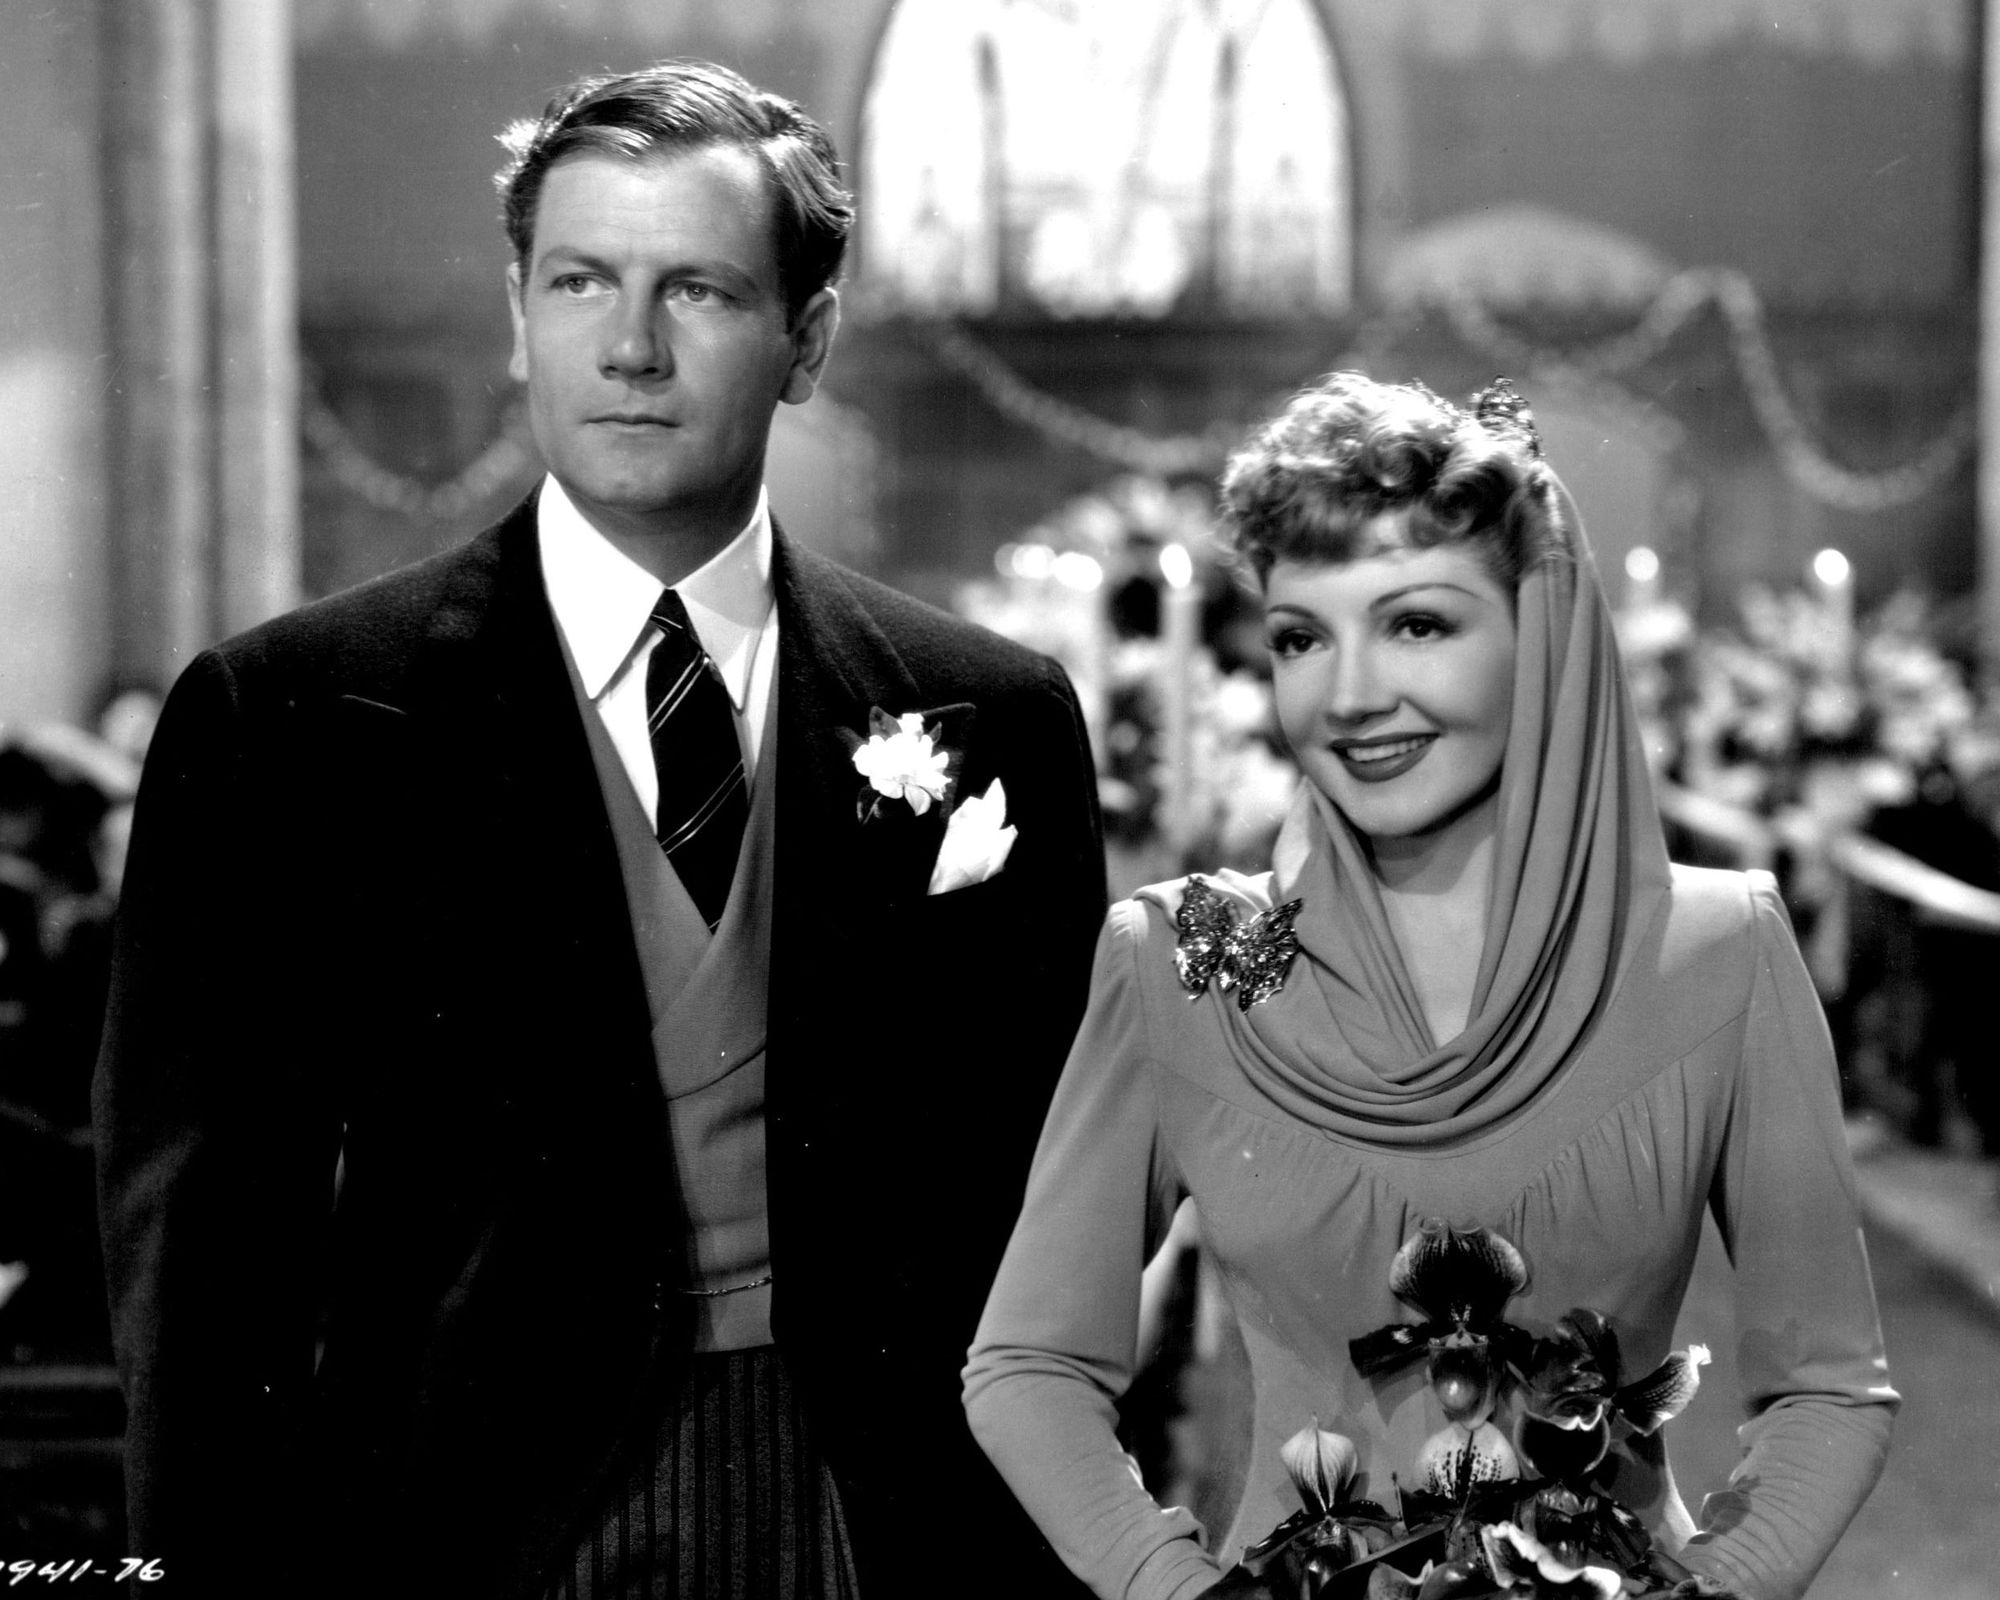 Joel McCrea and Claudette Colbert are sparring spouses in “The Palm Beach Story.”